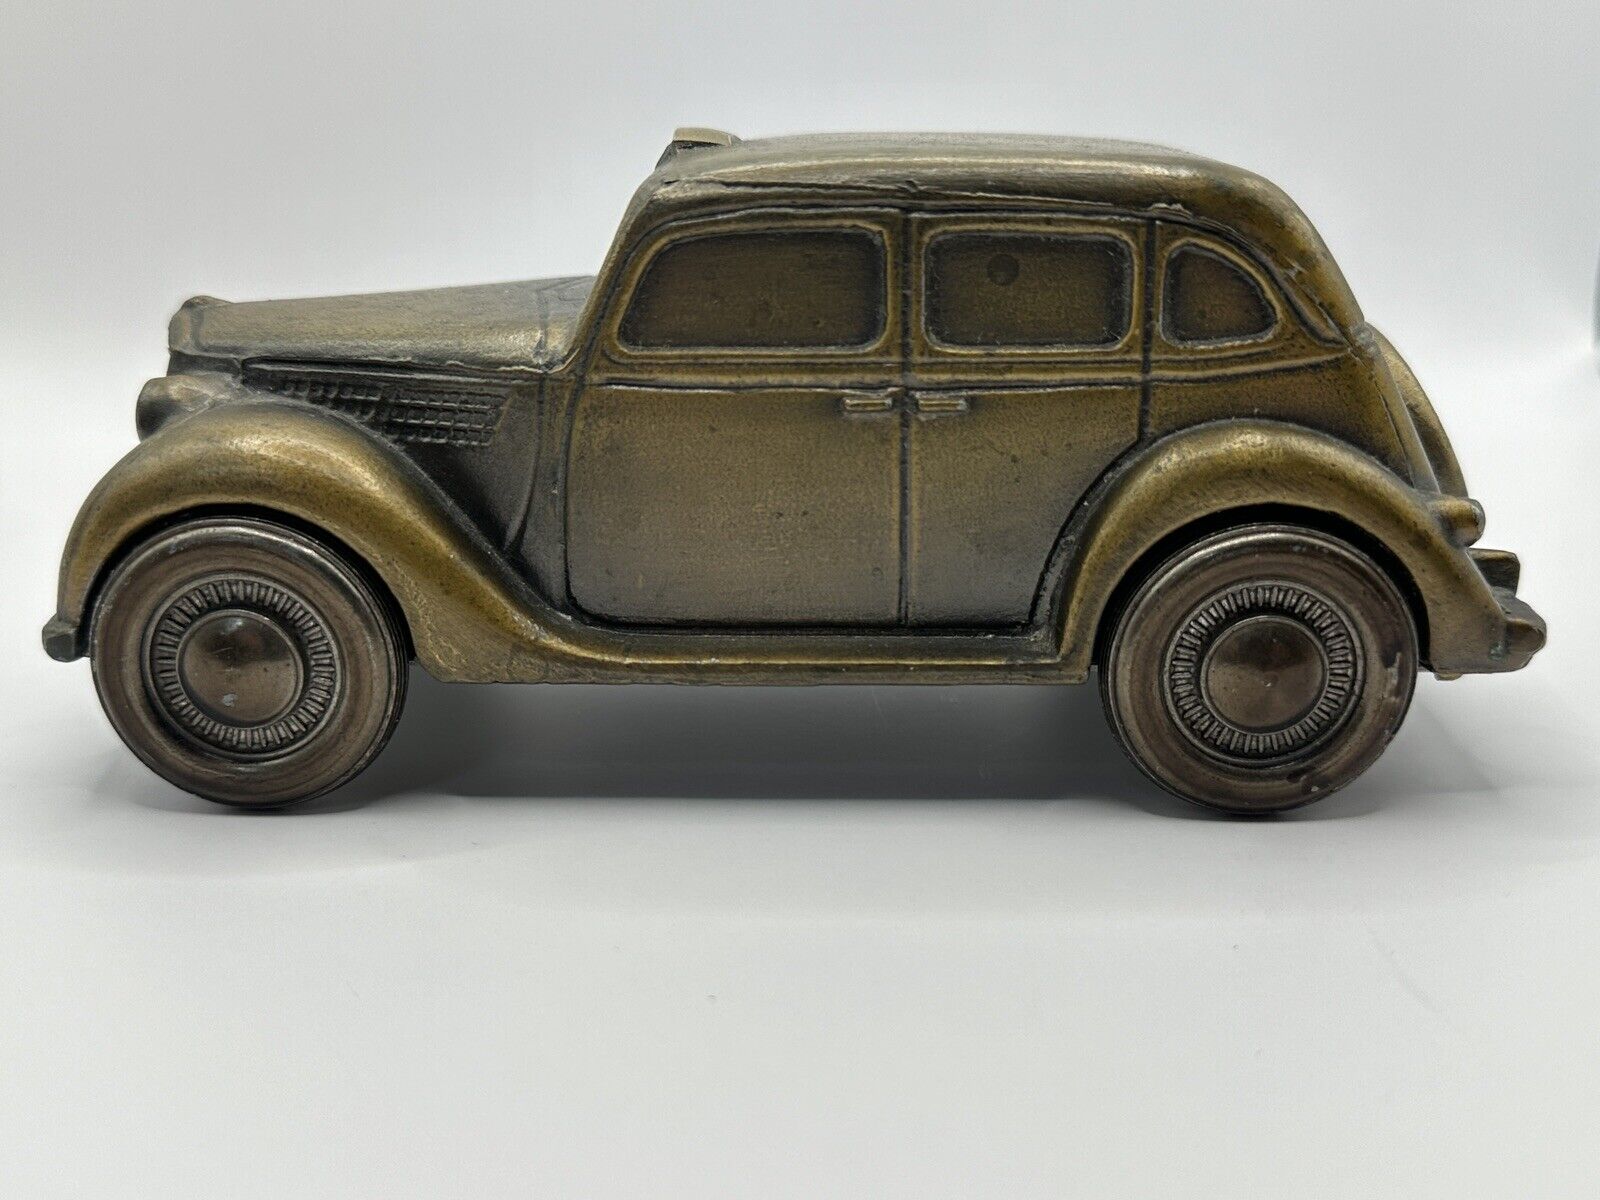 Vintage Banthrico Inc 1935 Ford Taxi Cab Coin Bank Bronze Colored Nice Wheels 